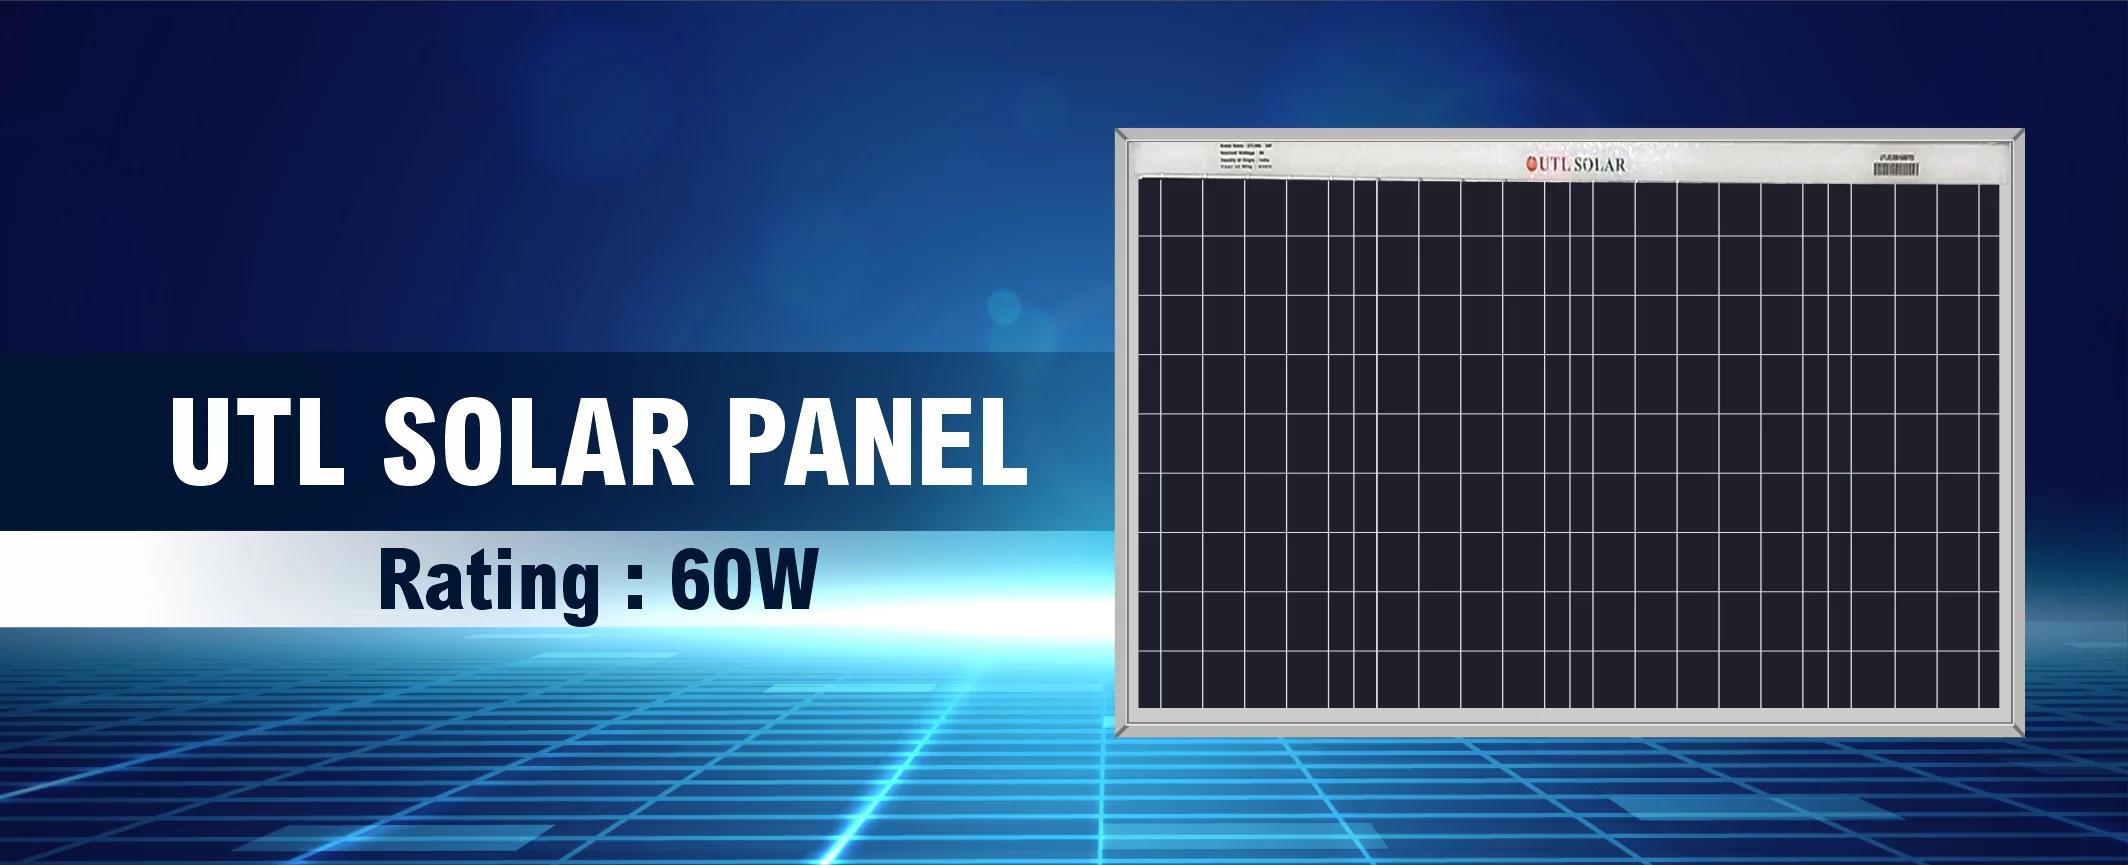 60 cell solar panel voltage - What voltage is a 60w solar panel